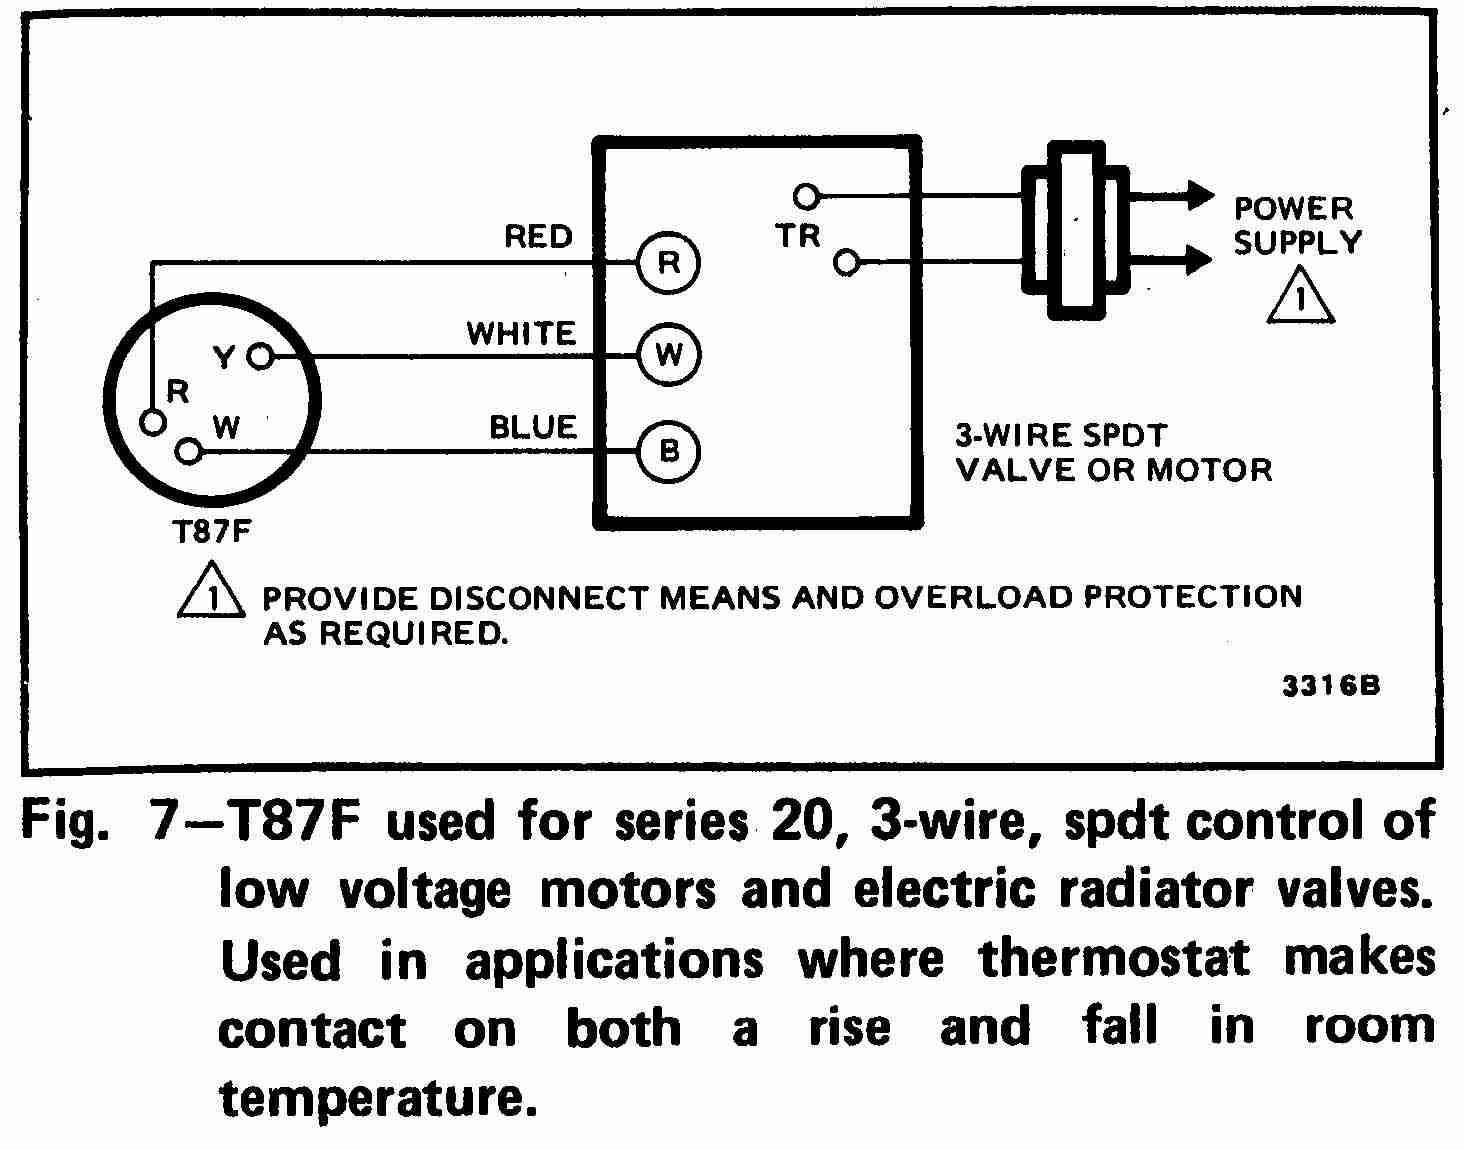 Standard Heat Only Thermostat Wiring Diagram | Wiring Diagram - 2 Wire Thermostat Wiring Diagram Heat Only